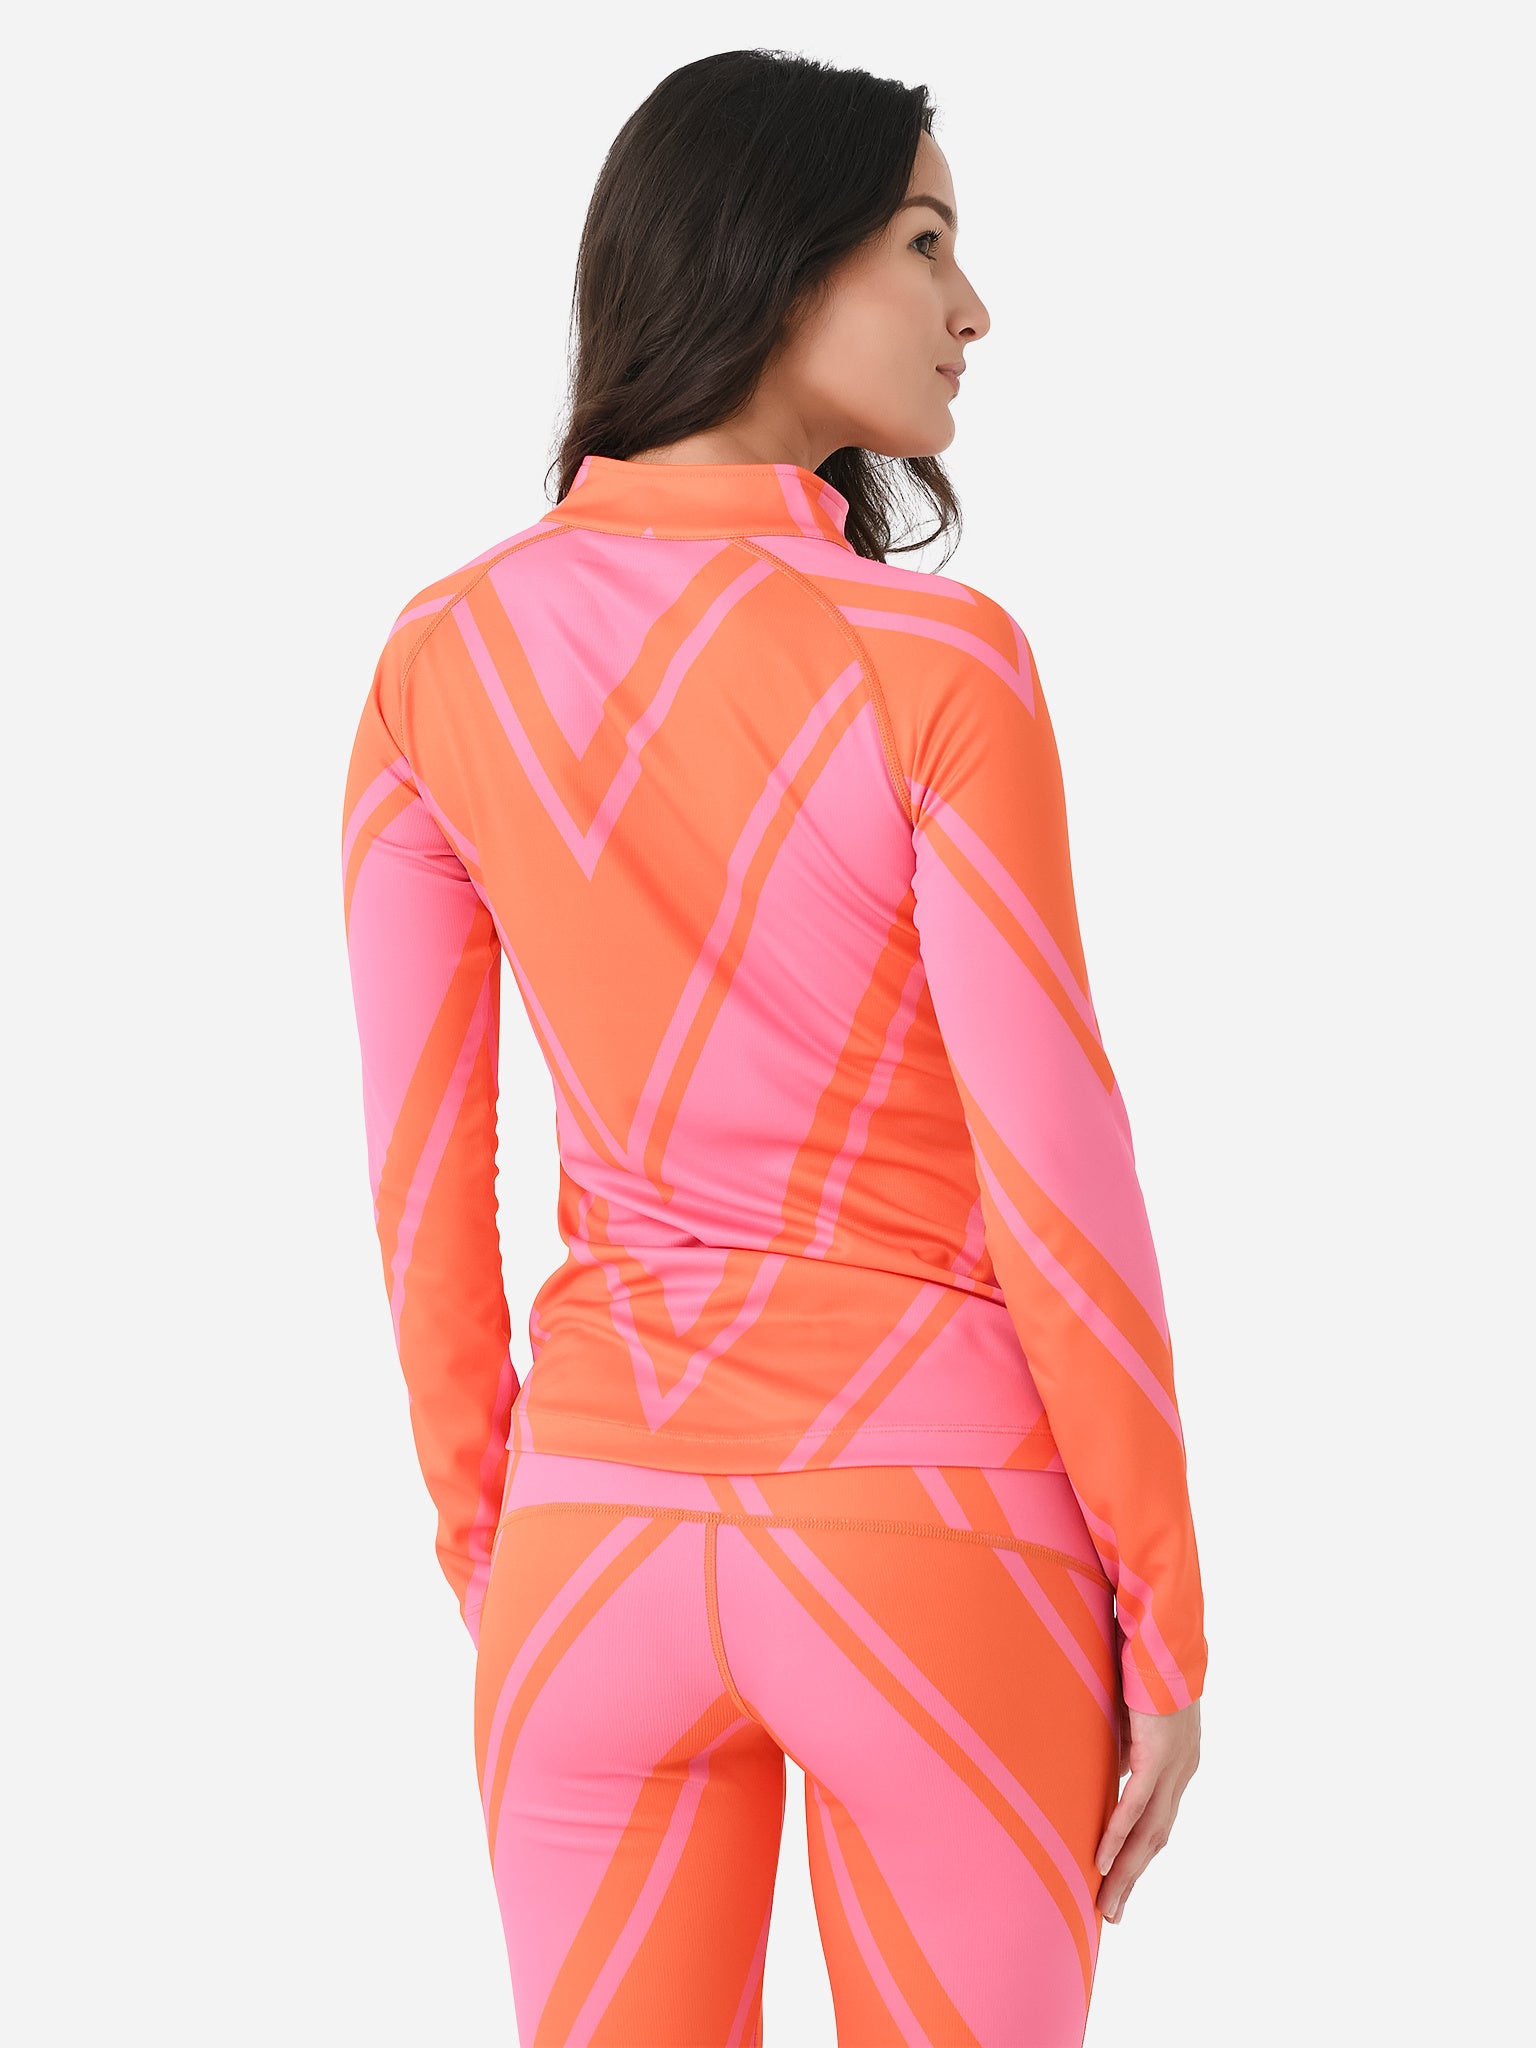 Stay warm this winter with a colourful UltraCORE Women's Long Sleeve  Thermal Top